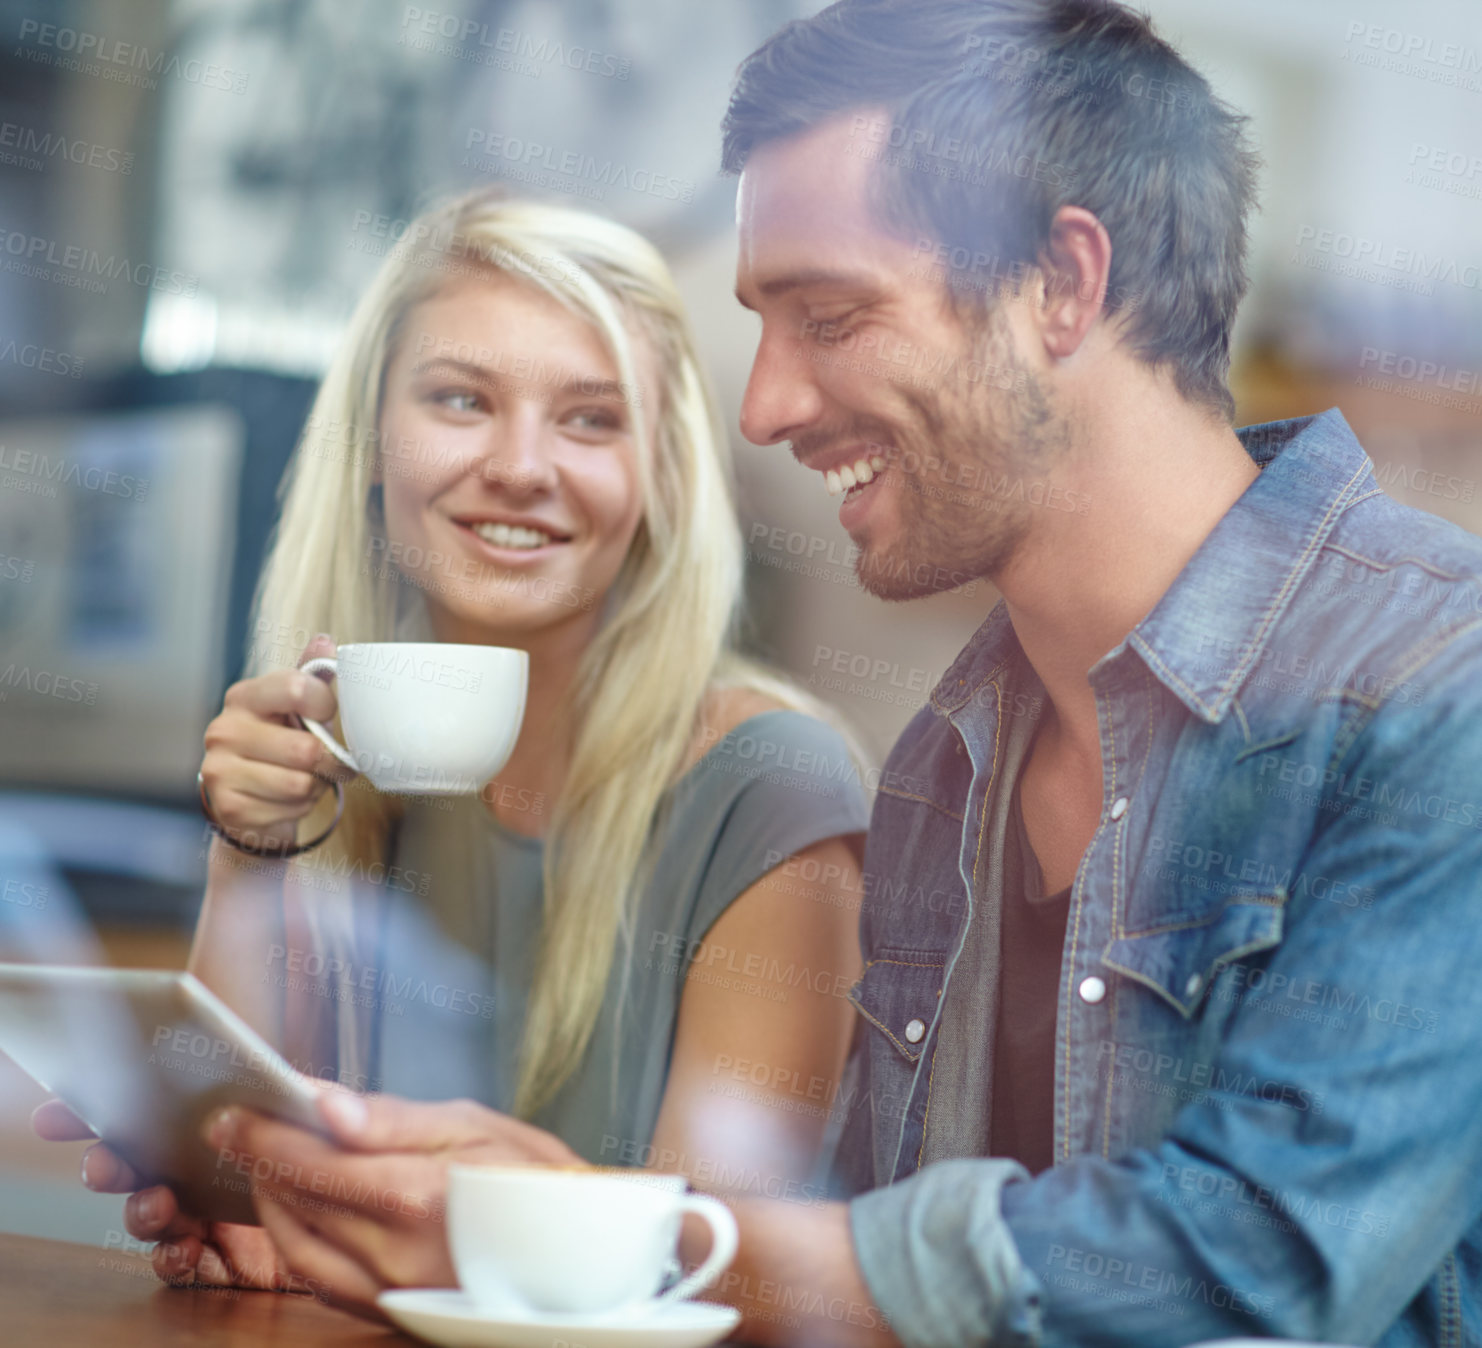 Buy stock photo Shot of a young couple sitting with a tablet while on a coffee date